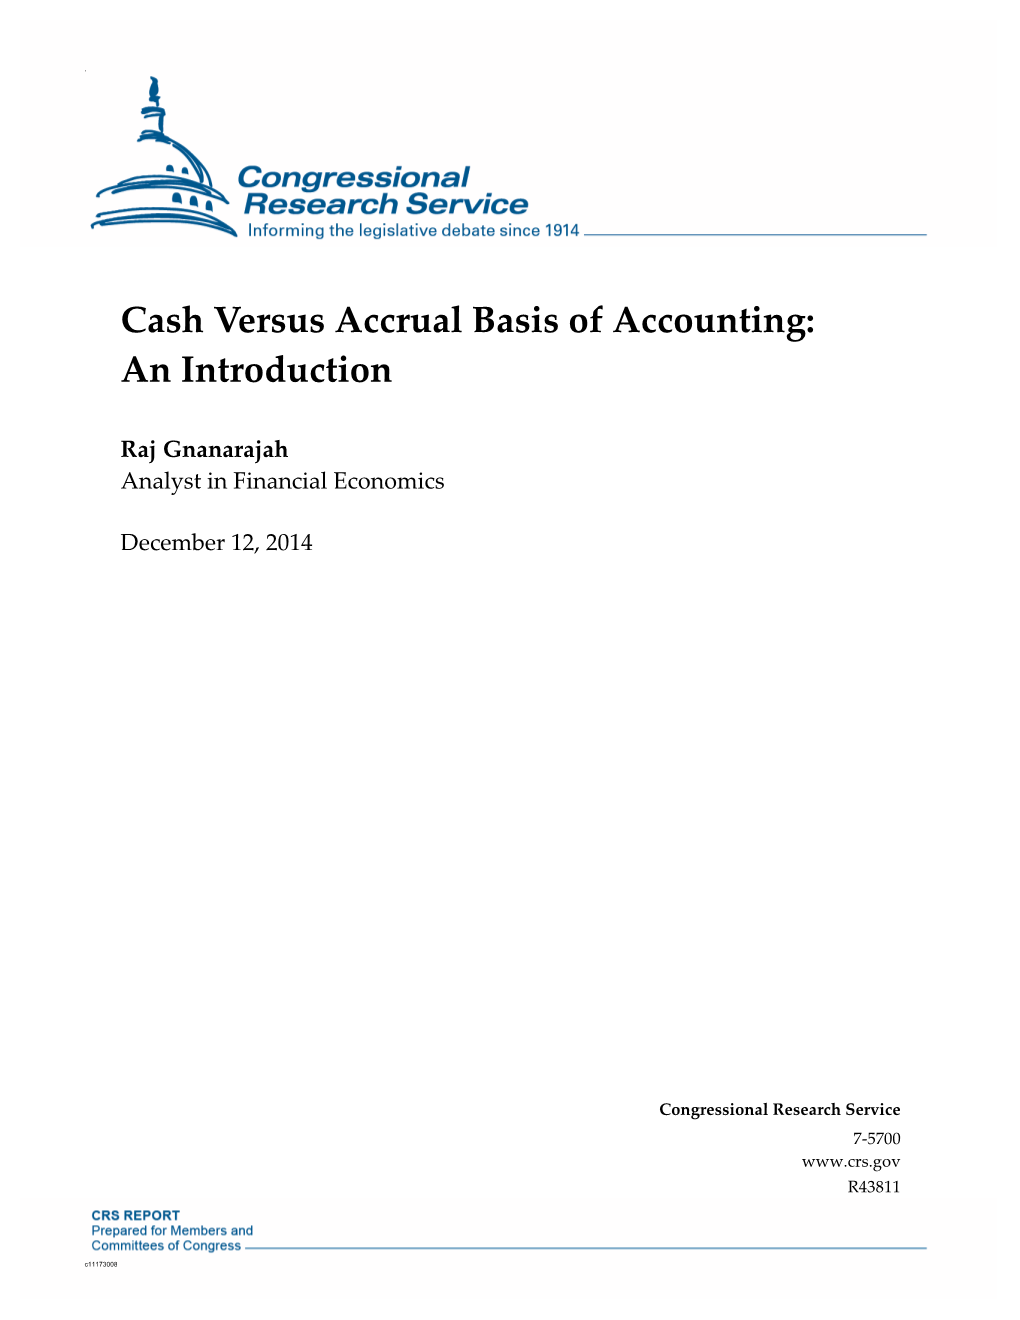 Cash Versus Accrual Basis of Accounting: an Introduction